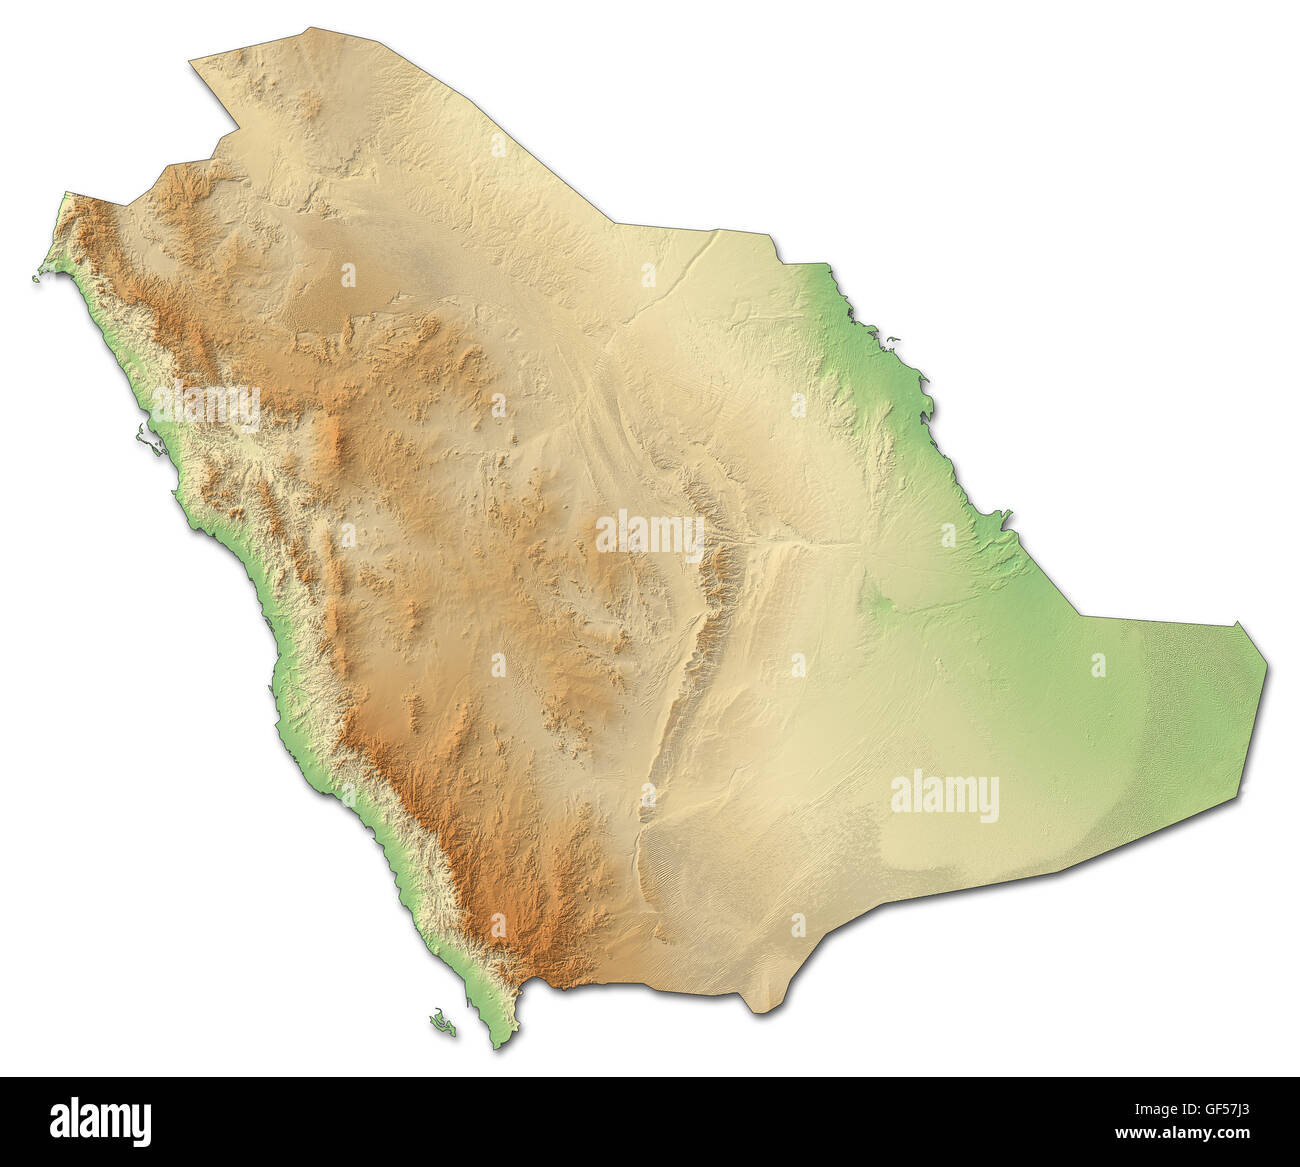 Relief map of Saudi Arabia with shaded relief. Stock Photo